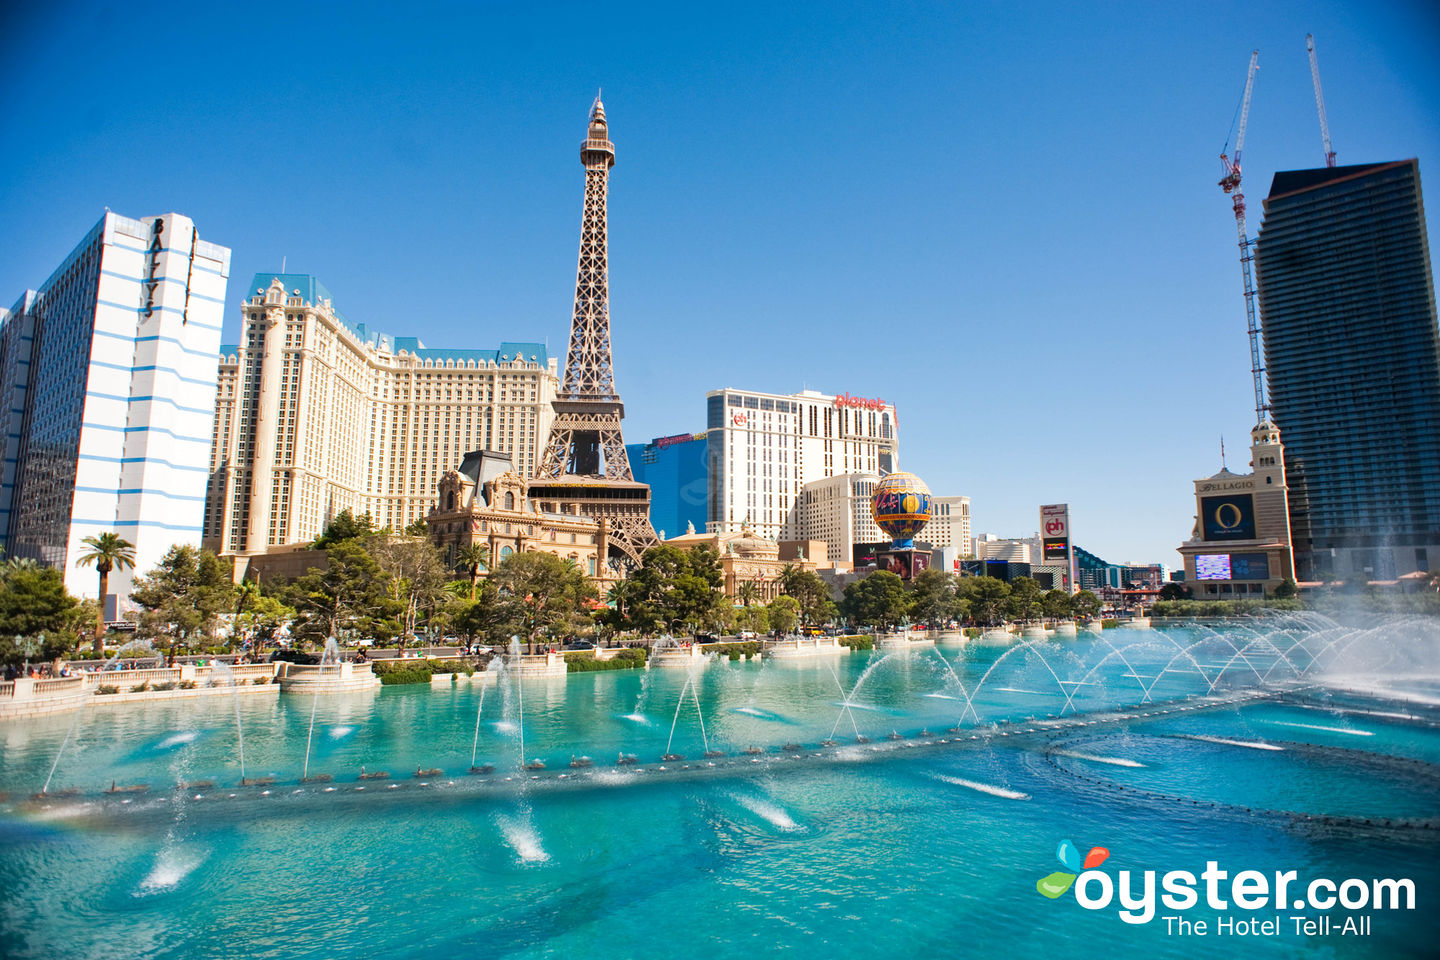 10 Things You Should Know Before Your First Trip To Las Vegas